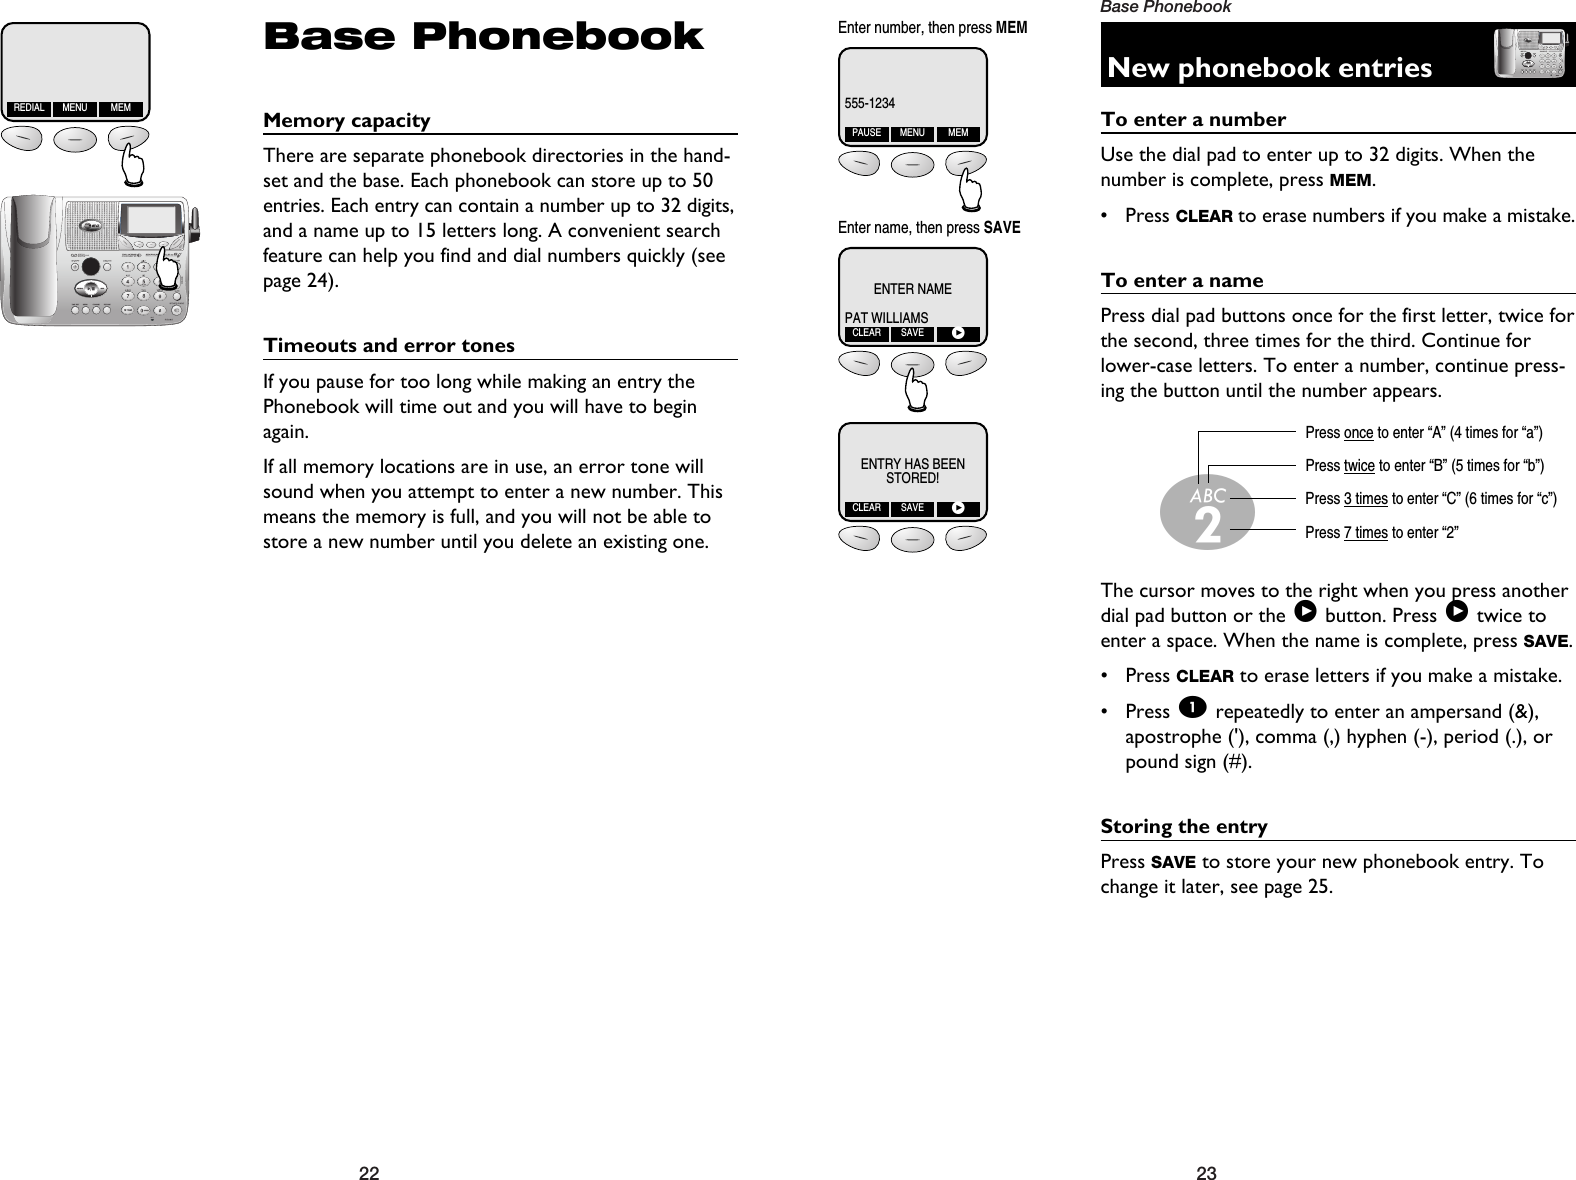 23Base Phonebook22Base PhonebookMemory capacityThere are separate phonebook directories in the hand-set and the base. Each phonebook can store up to 50entries. Each entry can contain a number up to 32 digits,and a name up to 15 letters long. A convenient searchfeature can help you find and dial numbers quickly (seepage 24).Timeouts and error tonesIf you pause for too long while making an entry thePhonebook will time out and you will have to beginagain.If all memory locations are in use, an error tone willsound when you attempt to enter a new number. Thismeans the memory is full, and you will not be able tostore a new number until you delete an existing one.REDIAL MENU MEMNew phonebook entriesTo enter a numberUse the dial pad to enter up to 32 digits. When thenumber is complete, press MEM.• Press CLEAR to erase numbers if you make a mistake.To enter a namePress dial pad buttons once for the first letter, twice forthe second, three times for the third. Continue forlower-case letters. To enter a number, continue press-ing the button until the number appears.The cursor moves to the right when you press anotherdial pad button or the &gt;button. Press &gt;twice toenter a space. When the name is complete, press SAVE.• Press CLEAR to erase letters if you make a mistake.• Press 1repeatedly to enter an ampersand (&amp;),apostrophe (&apos;), comma (,) hyphen (-), period (.), orpound sign (#).Storing the entryPress SAVE to store your new phonebook entry. Tochange it later, see page 25.Press once to enter “A” (4 times for “a”)Press twice to enter “B” (5 times for “b”)Press 3 times to enter “C” (6 times for “c”)Press 7 times to enter “2”2555-1234PAUSE MENU MEMENTER NAMEPAT WILLIAMSCLEAR SAVE&gt;ENTRY HAS BEENSTORED!CLEAR SAVE&gt;Enter number, then press MEMEnter name, then press SAVE